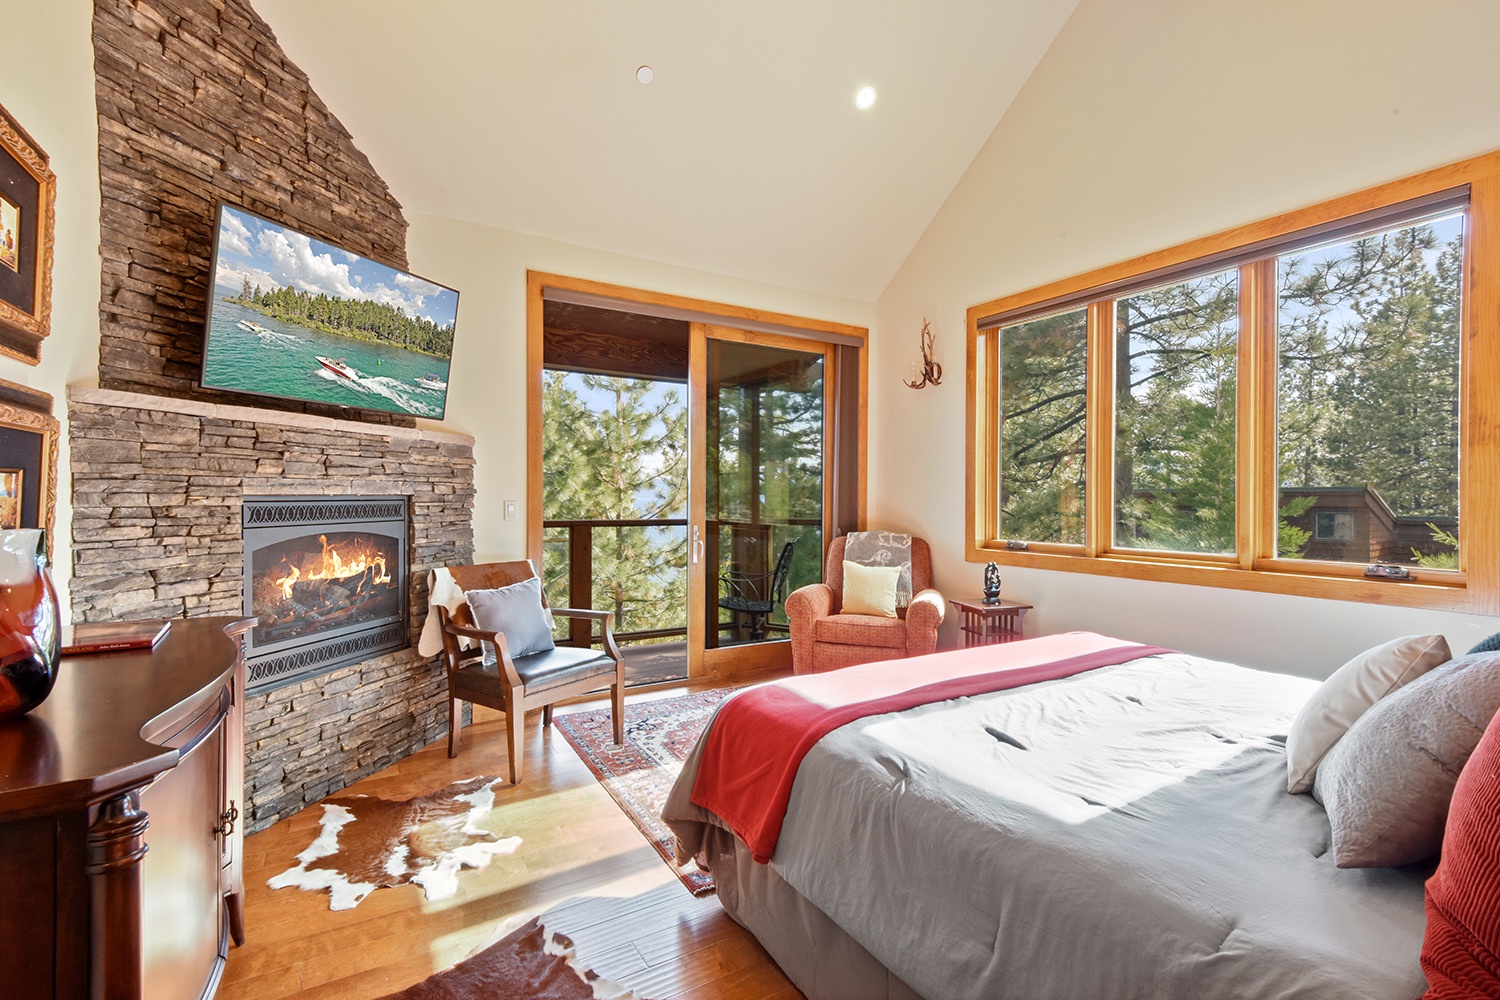 2nd floor master bedroom: King bed with private balcony, Smart TV, gas fireplace